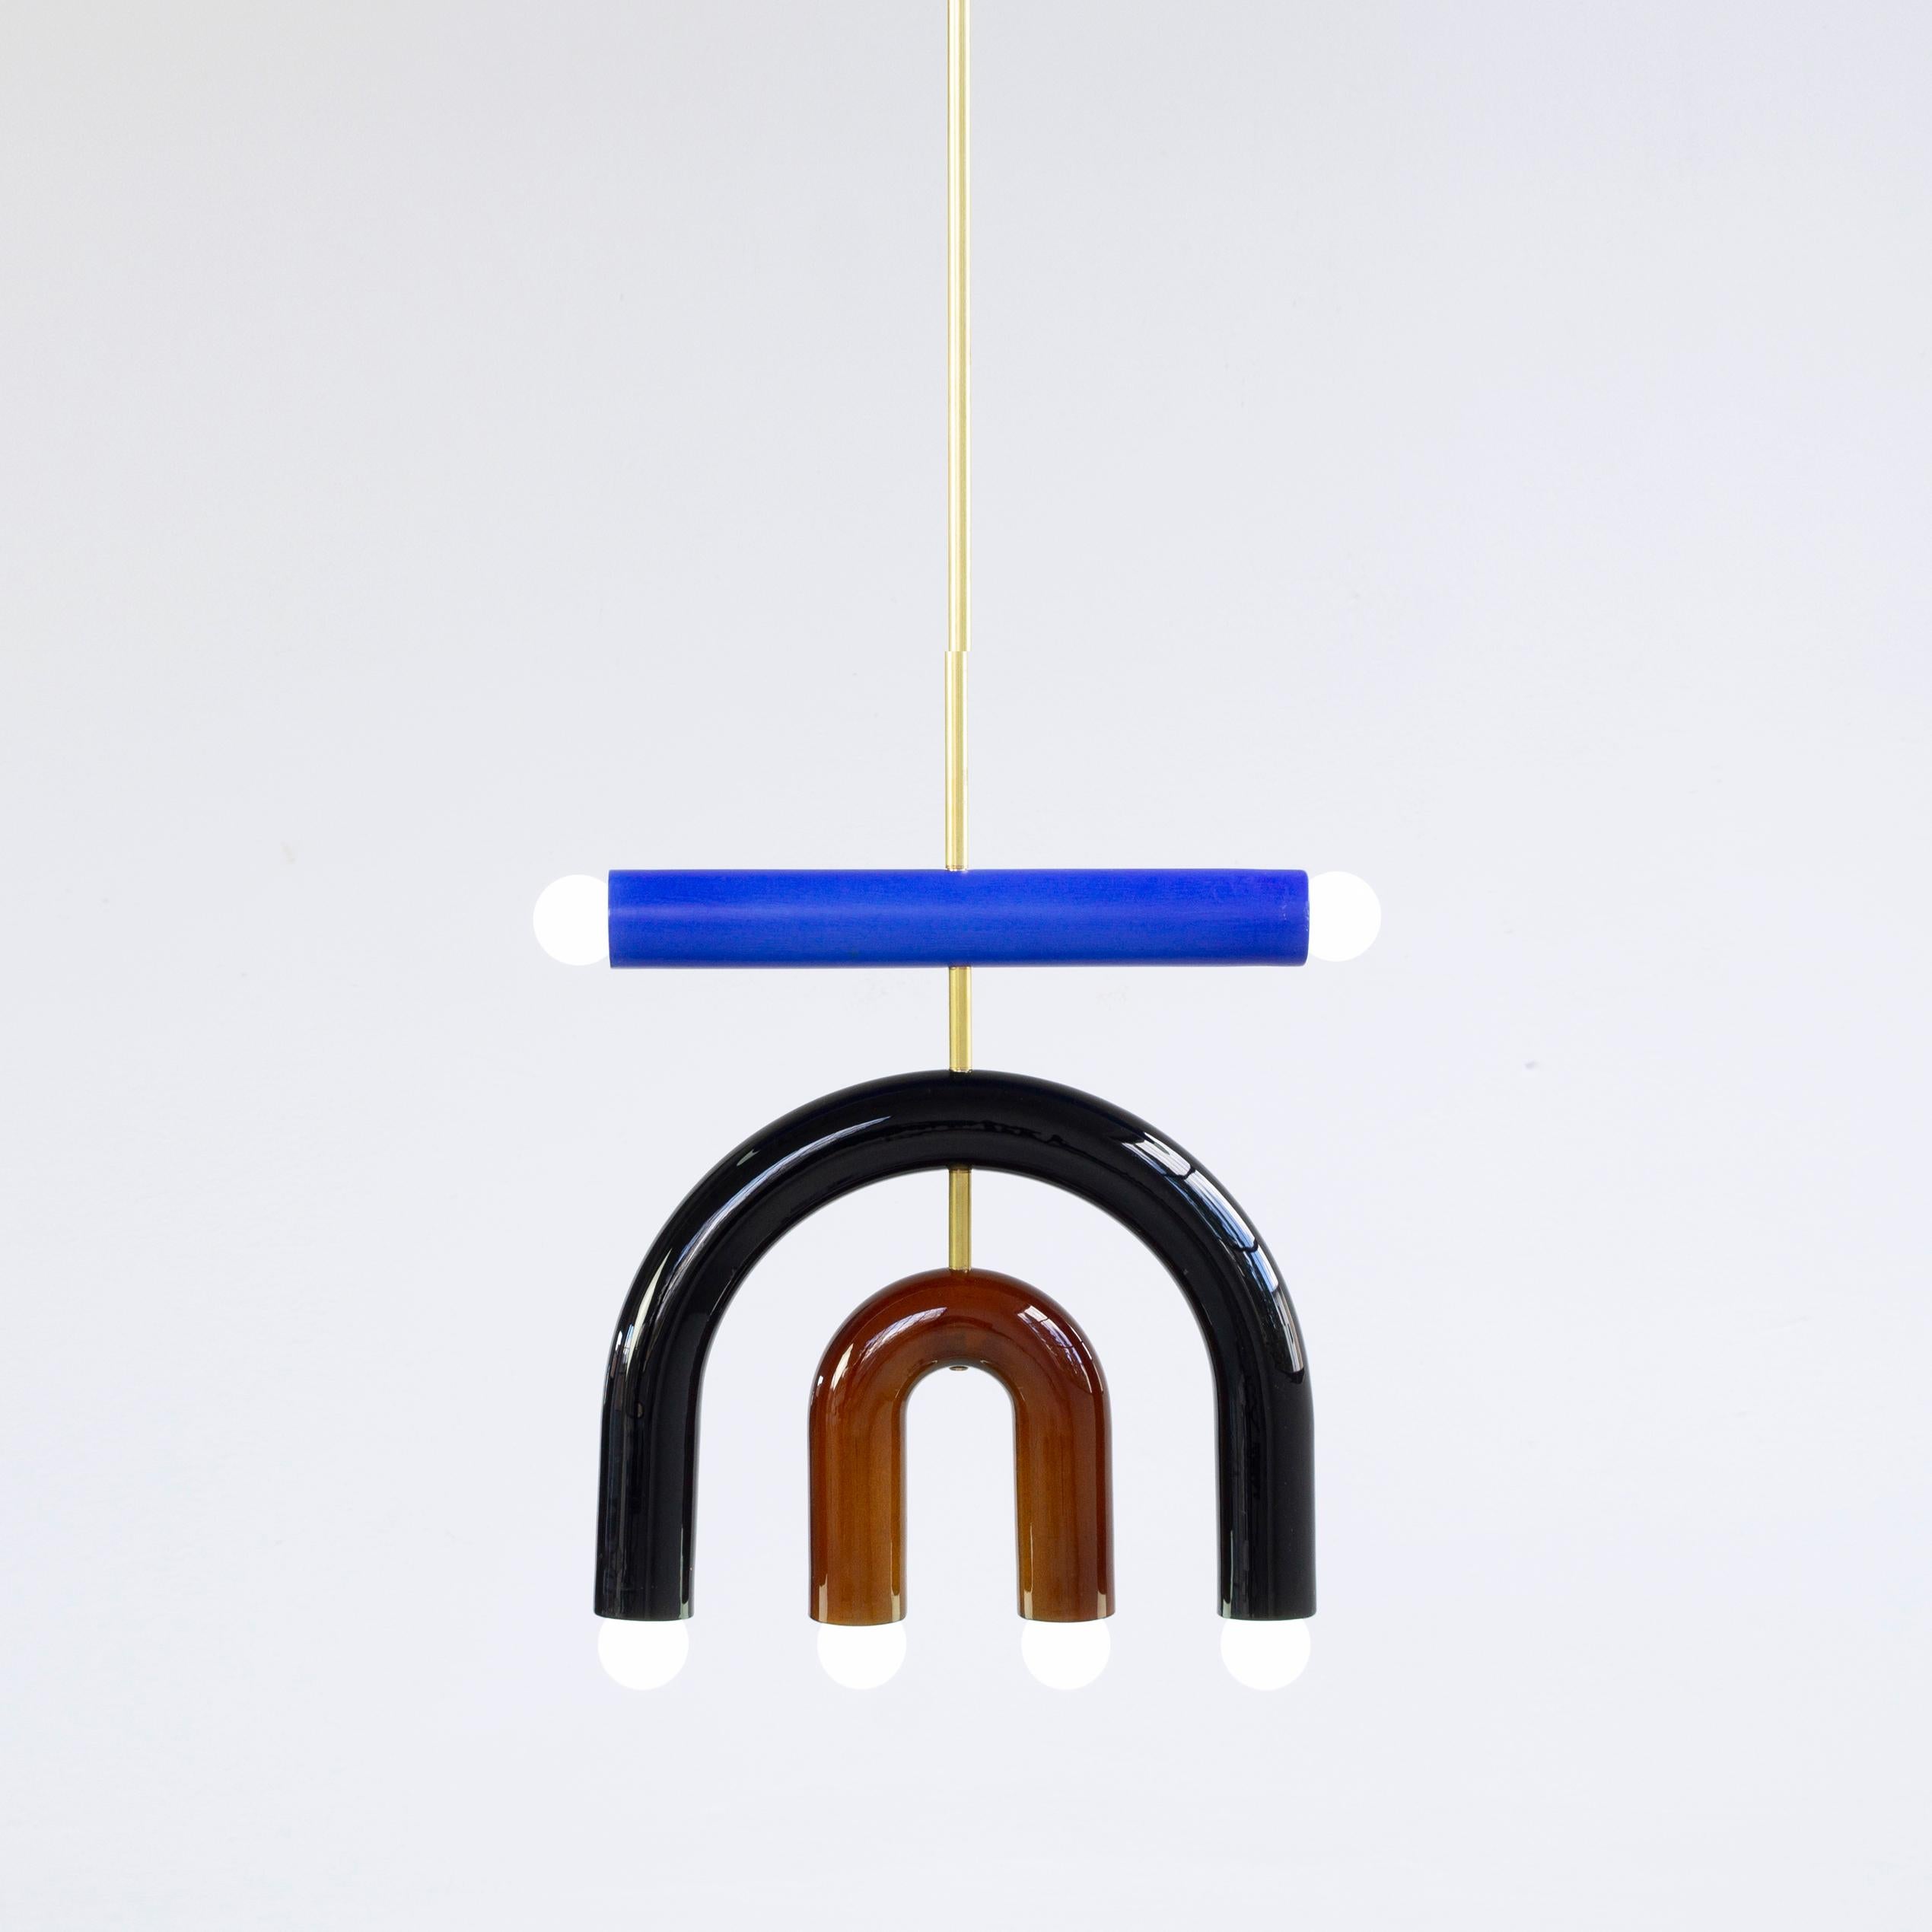 TRN D1 pendant lamp II by Pani Jurek
Dimensions: D 5 x W 35 x H 38 cm 
Material: Hand glazed ceramic and brass.
Available in other colors.
Lamps from the TRN collection hang on a metal tube, not on a cable. This allows the lamp to be mounted in a